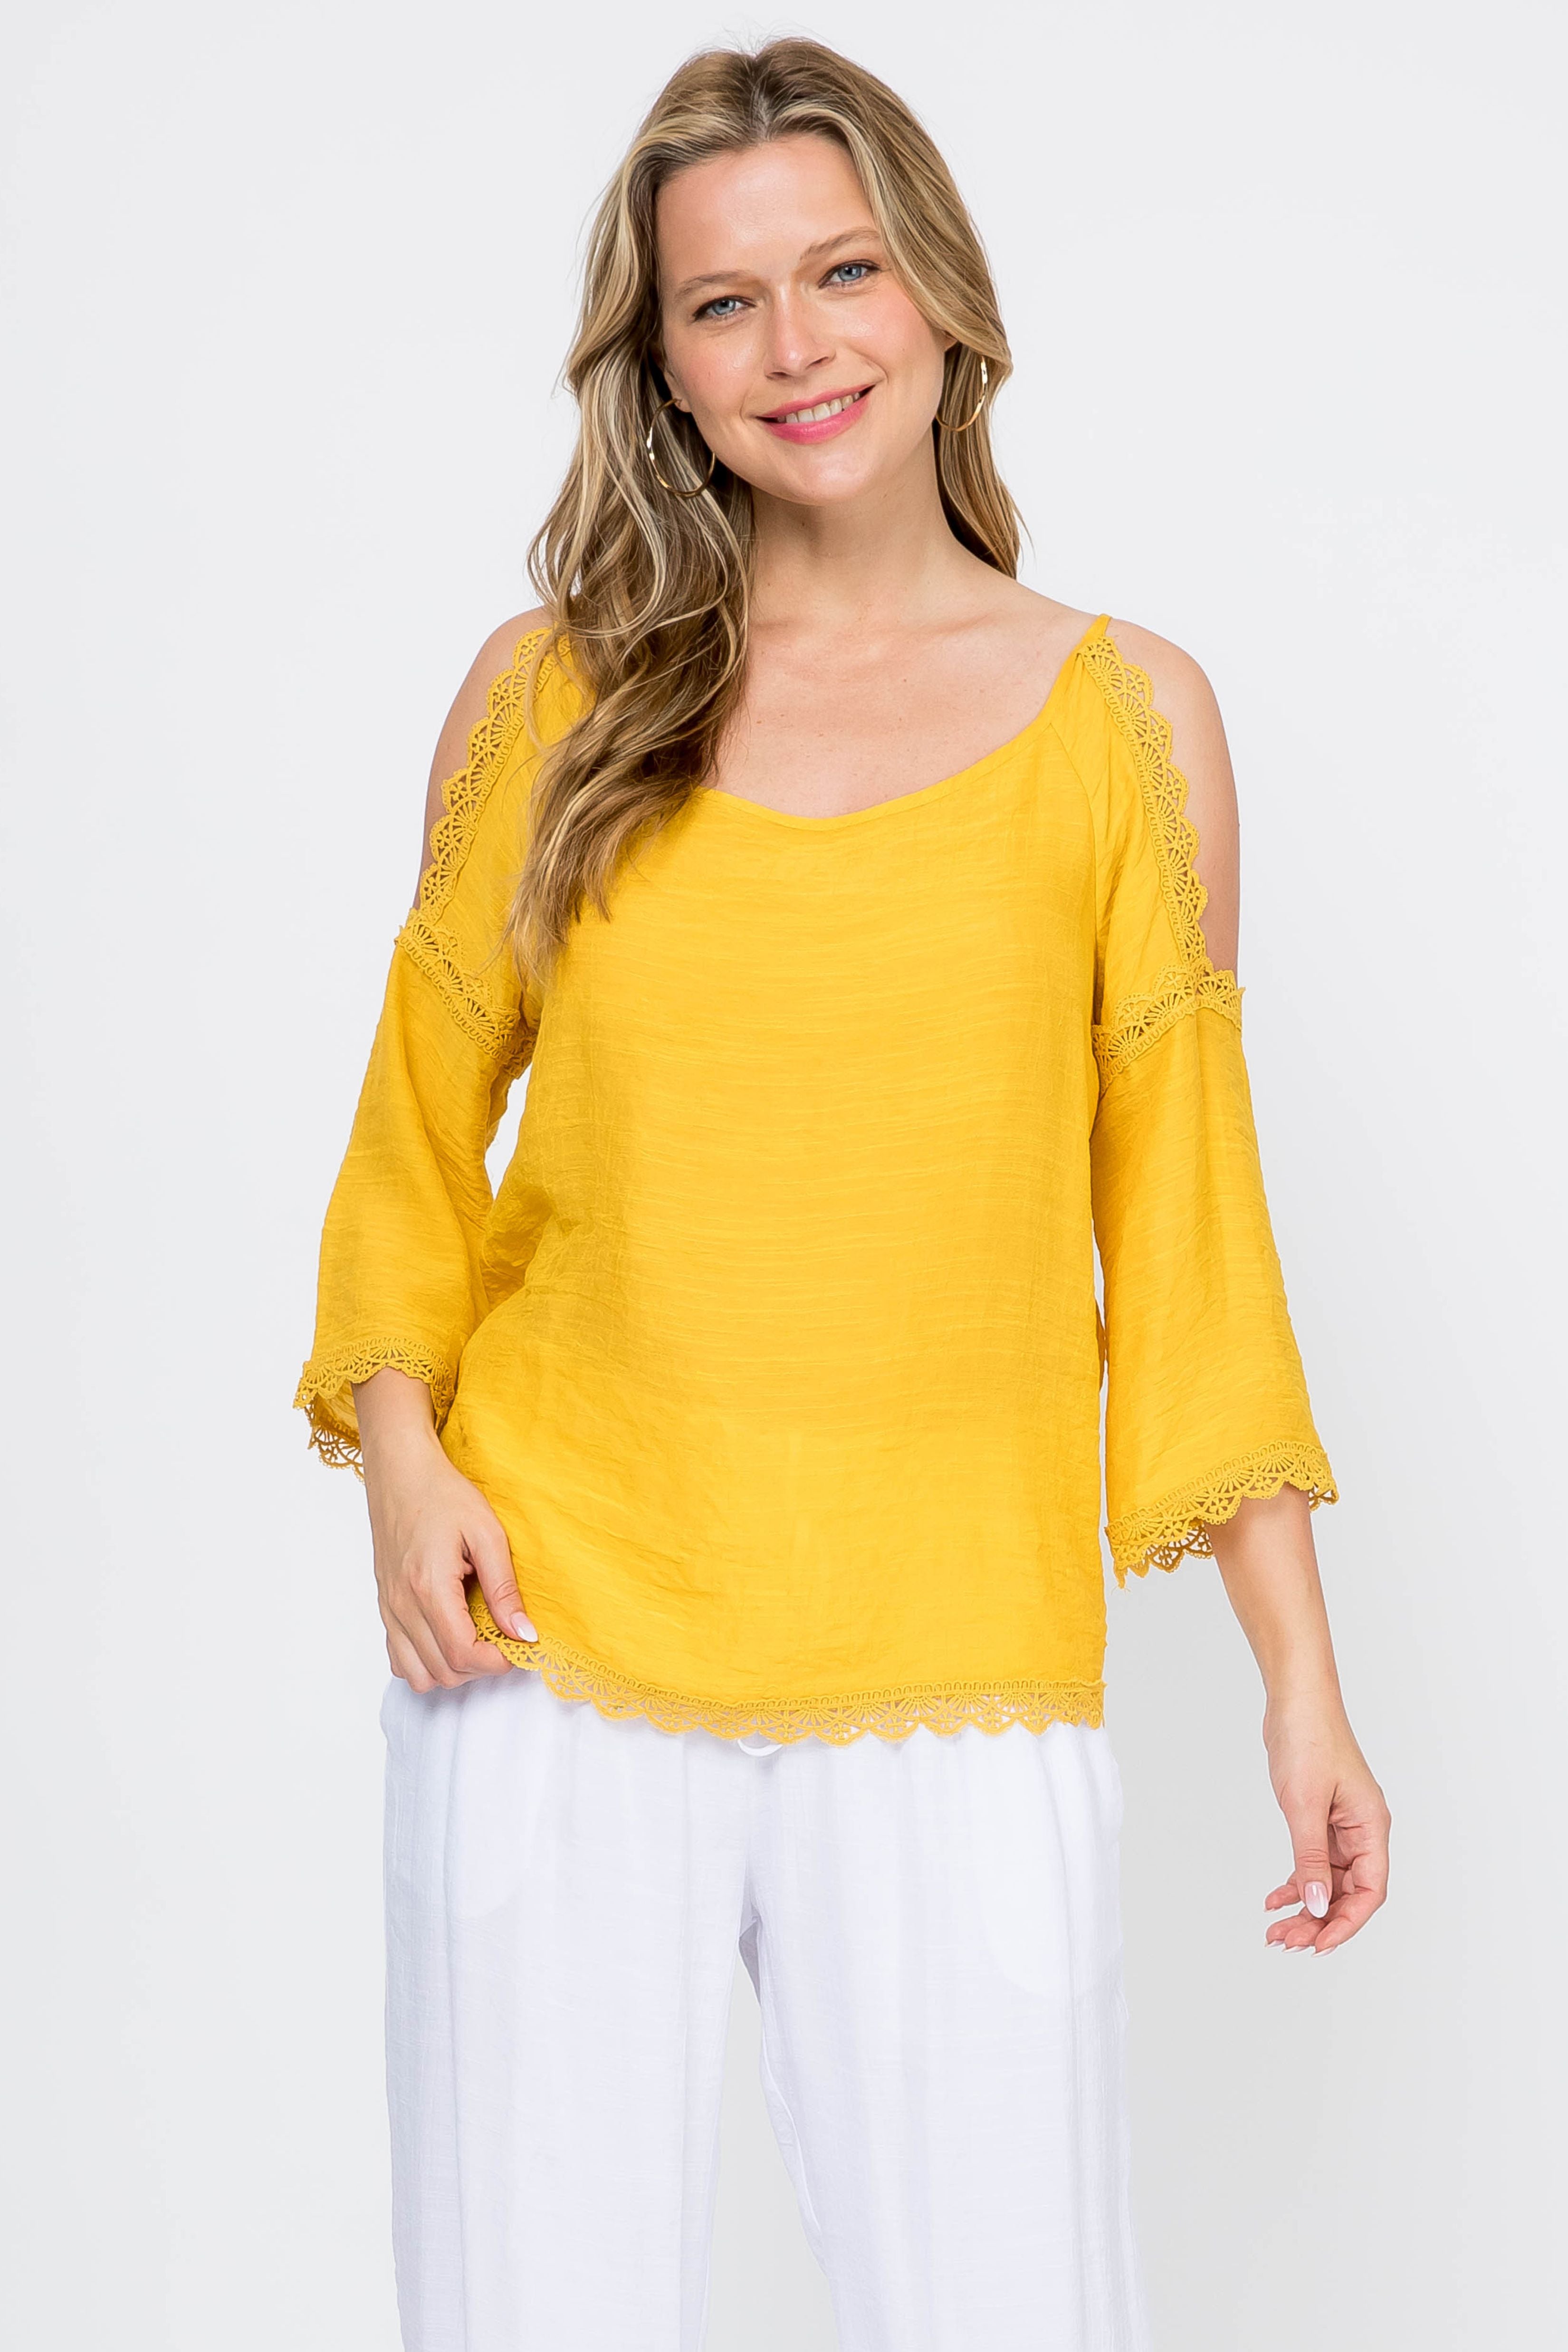 4 Sleeve Tunic Top - Mojito Collection - Vacation Clothing, Women's Clothing, Women's Resort Wear, Women's Top